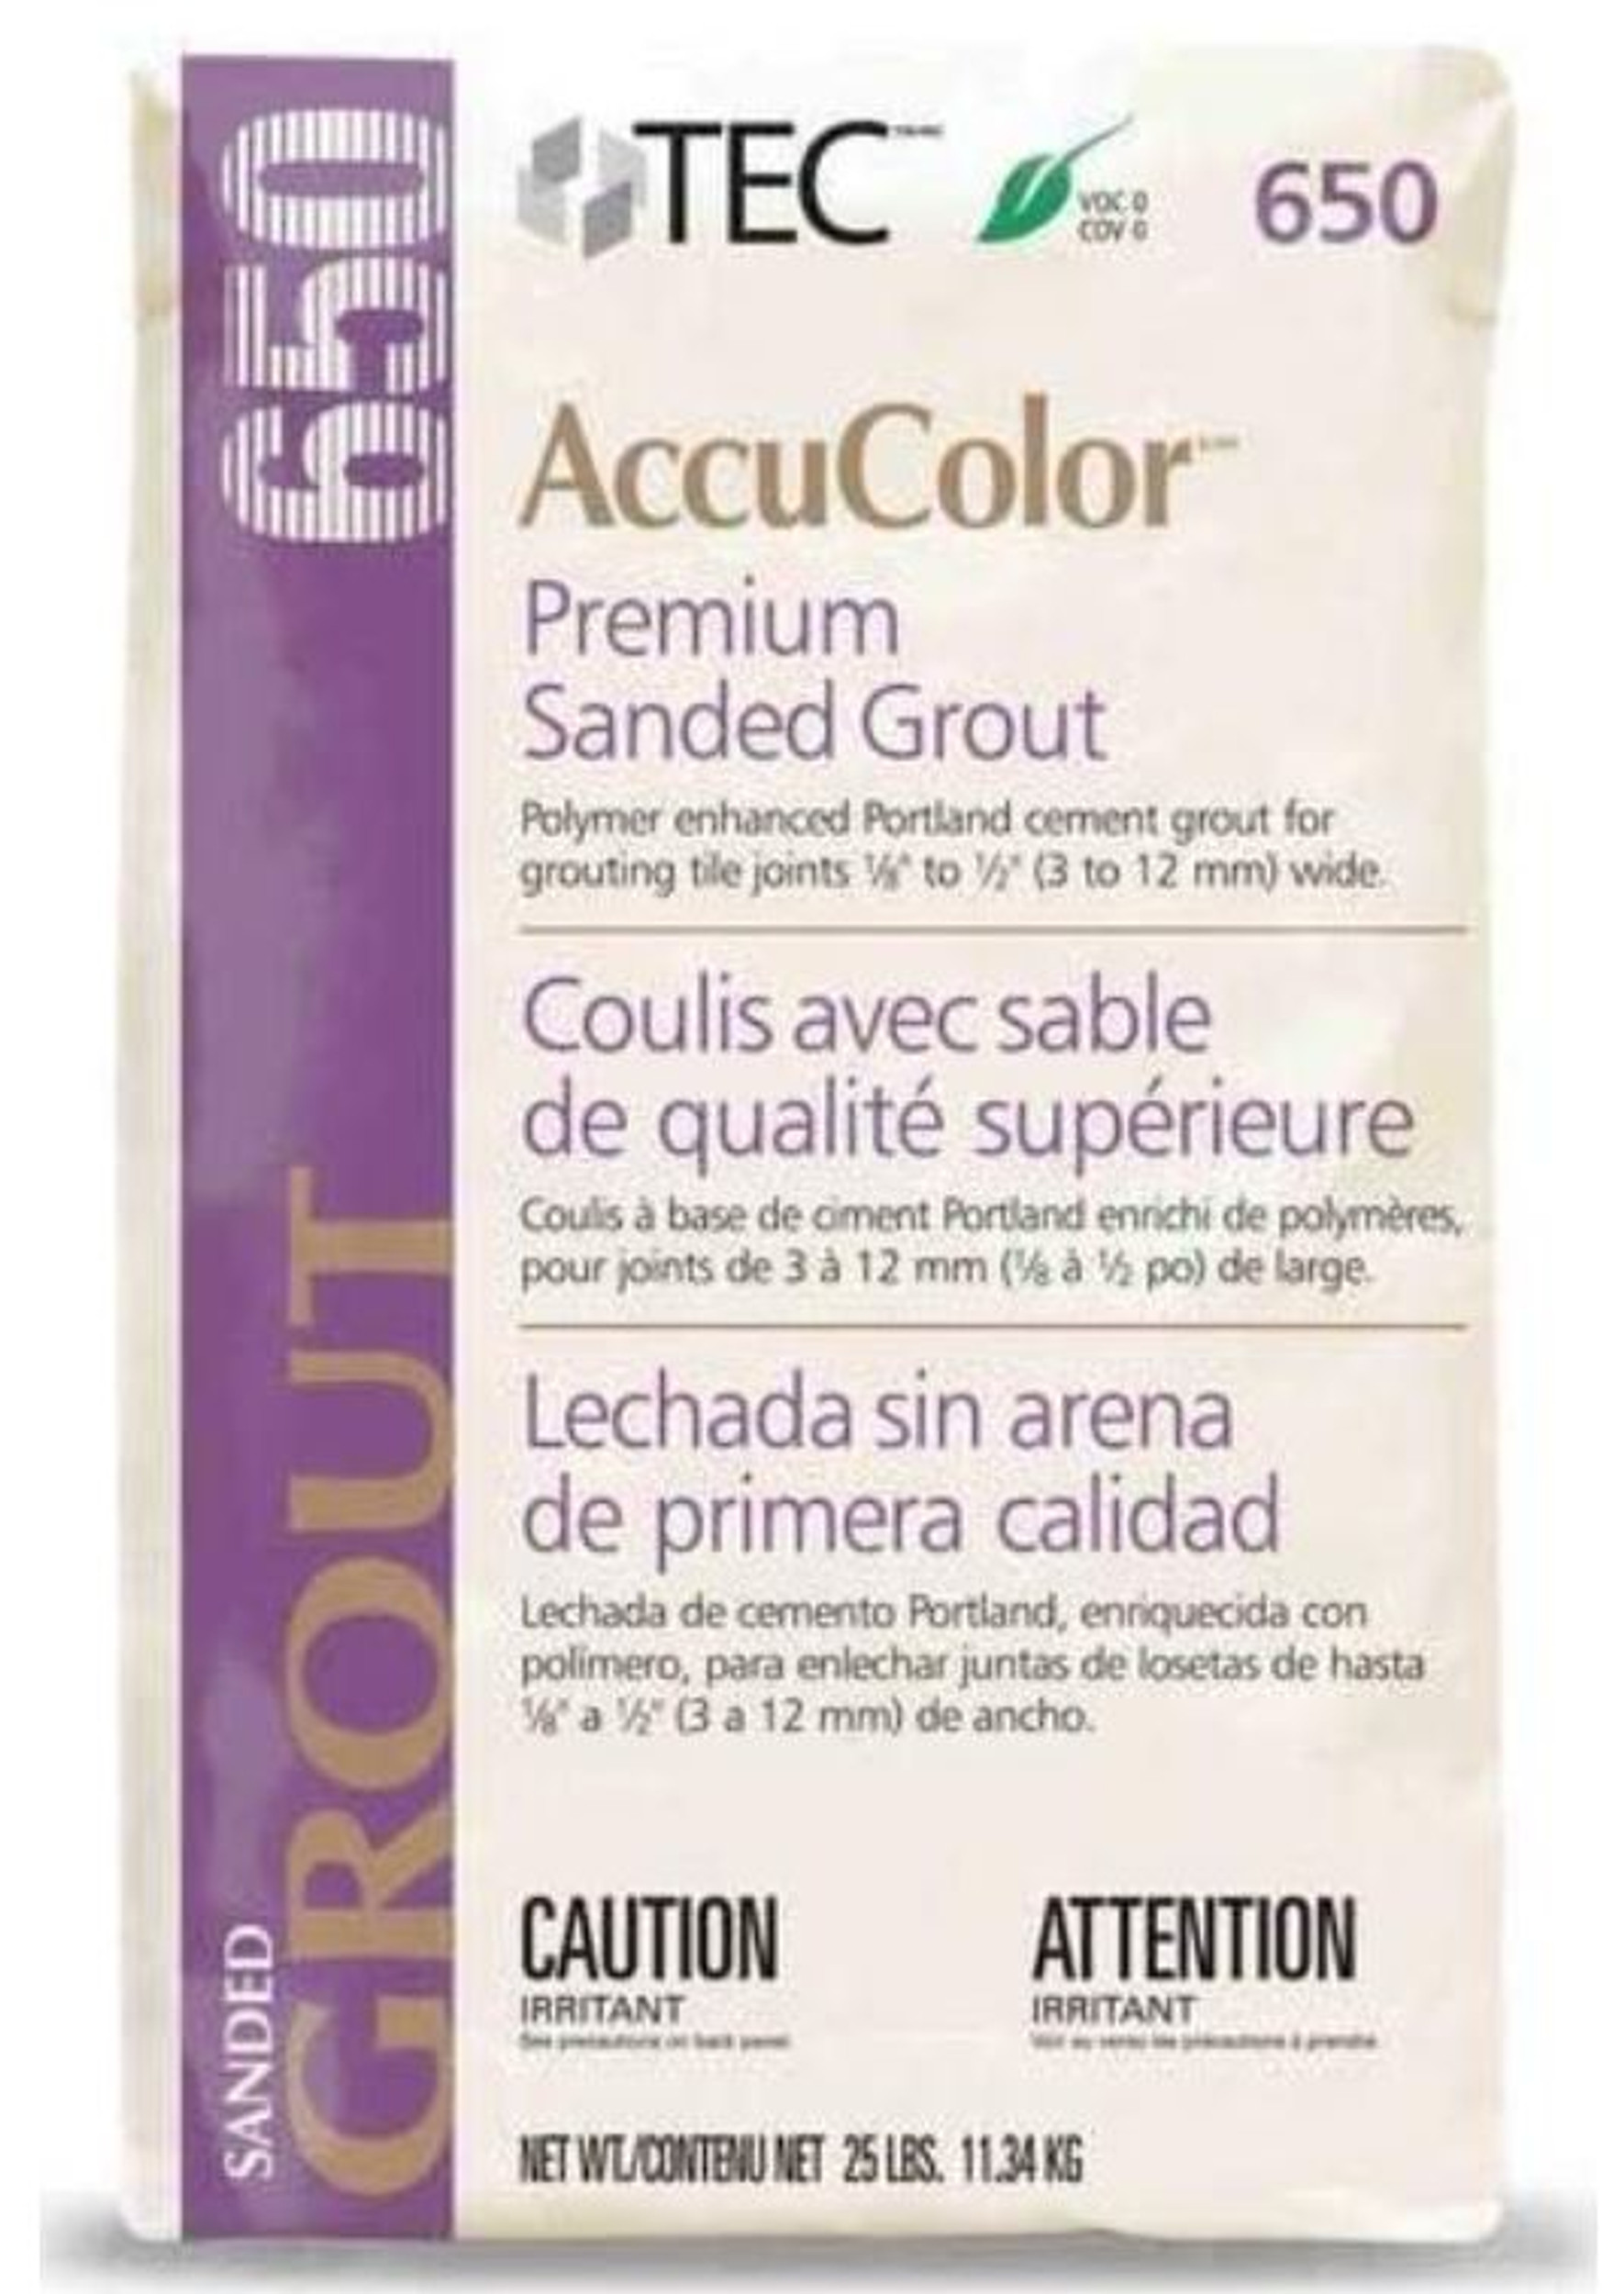 TEC AccuColor 944 Light Chocolate 25lb Sanded Grout